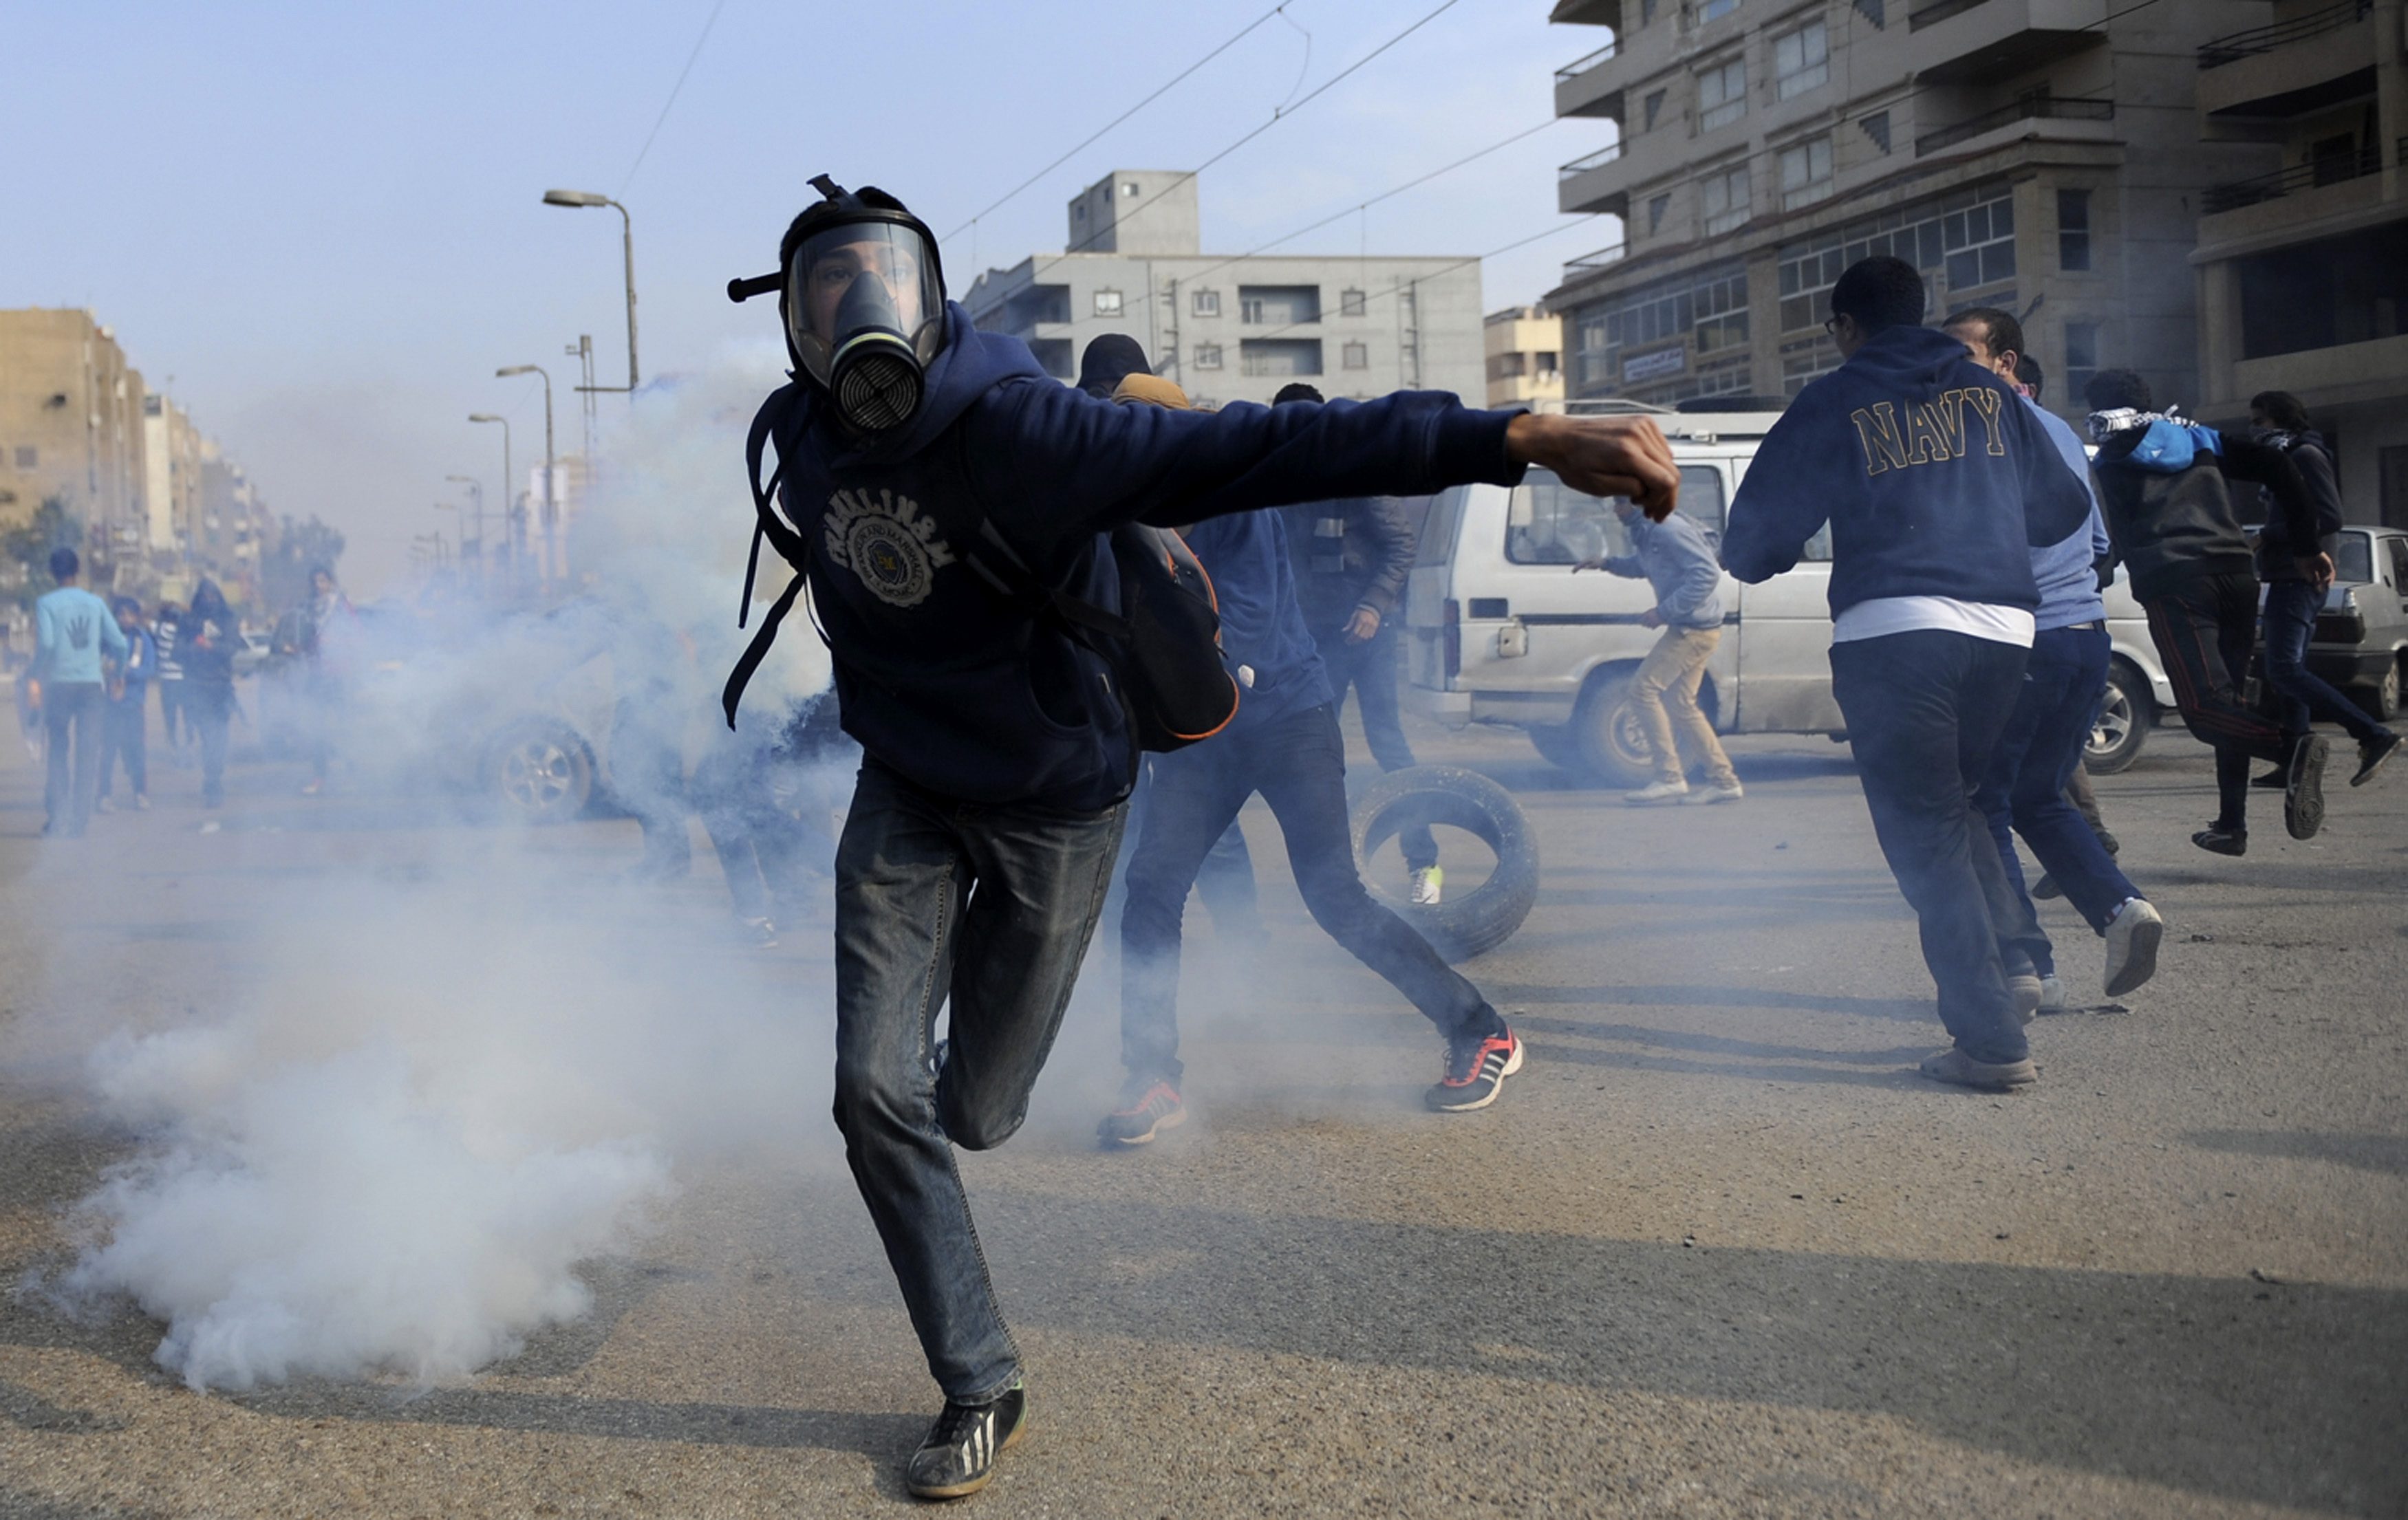 Official: 37 injured in Friday clashes, no deaths